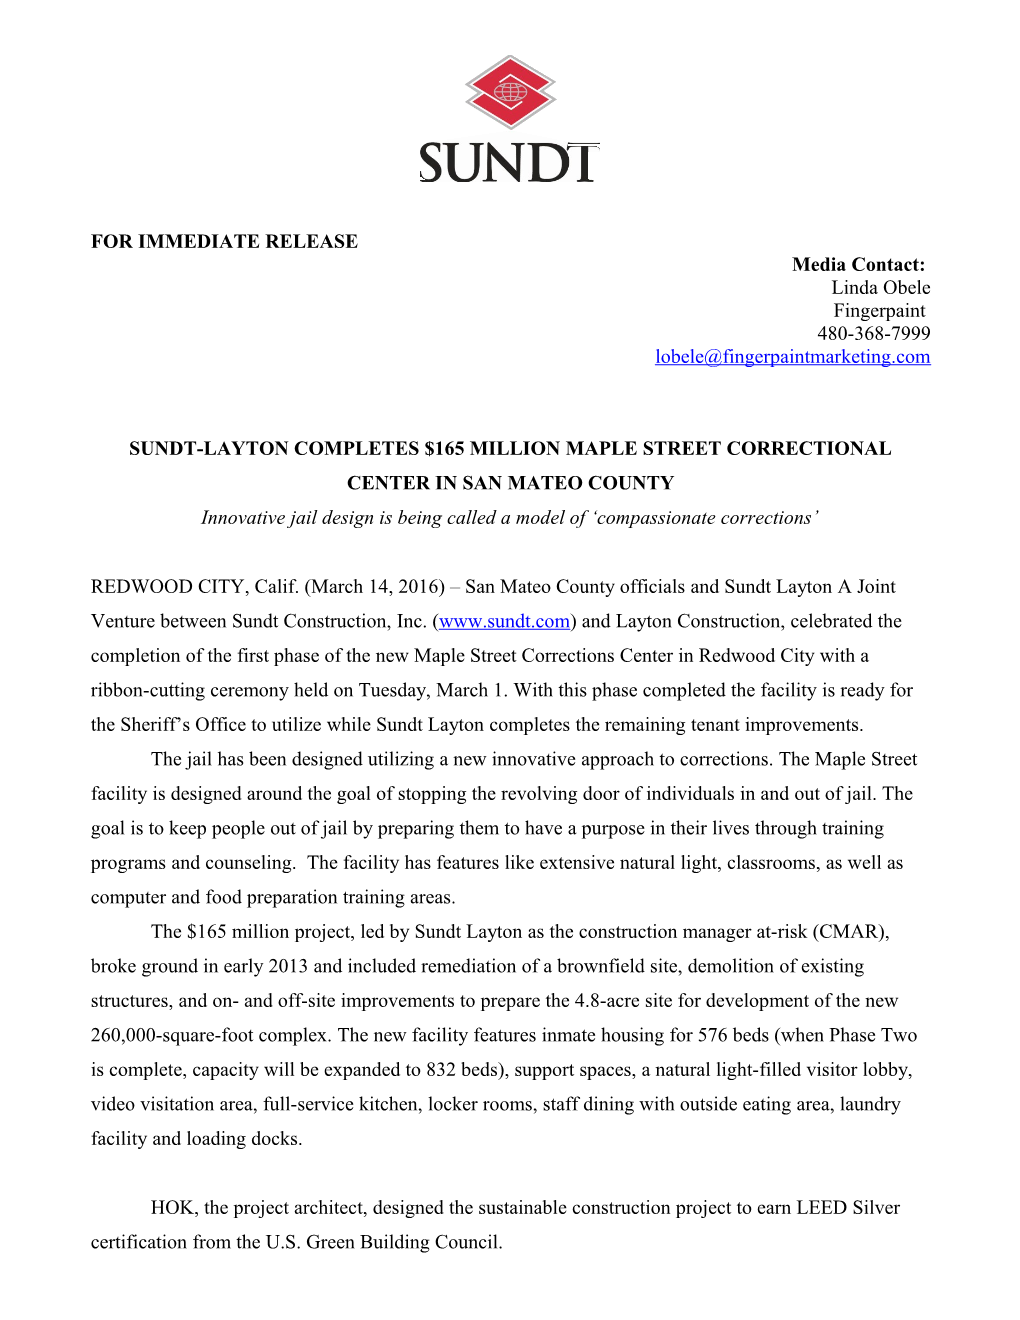 Sundt-Layton Completes $165Million Maple Street Correctional Center in San Mateo County